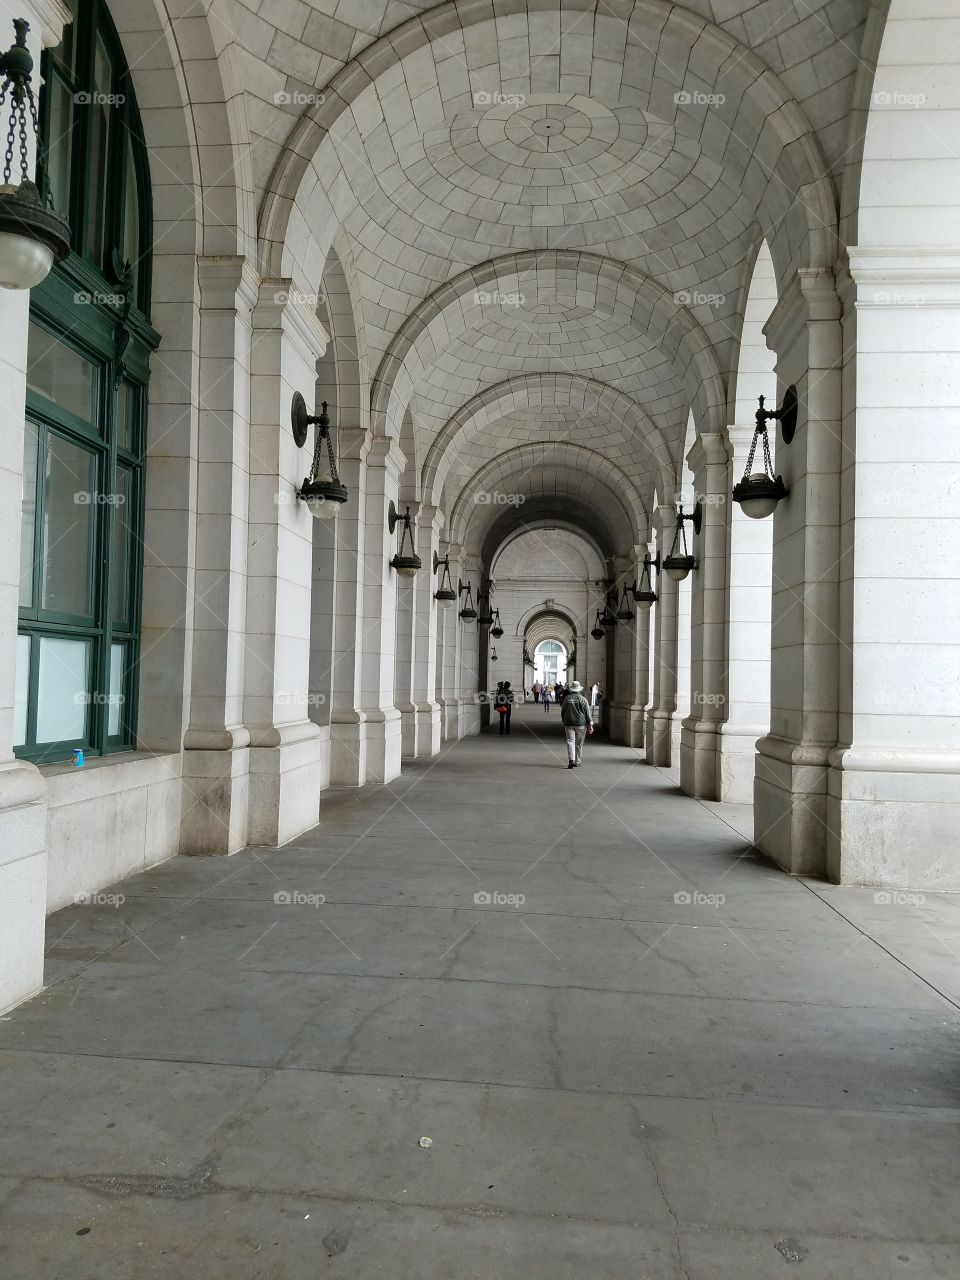 Archway outside Union Station metro